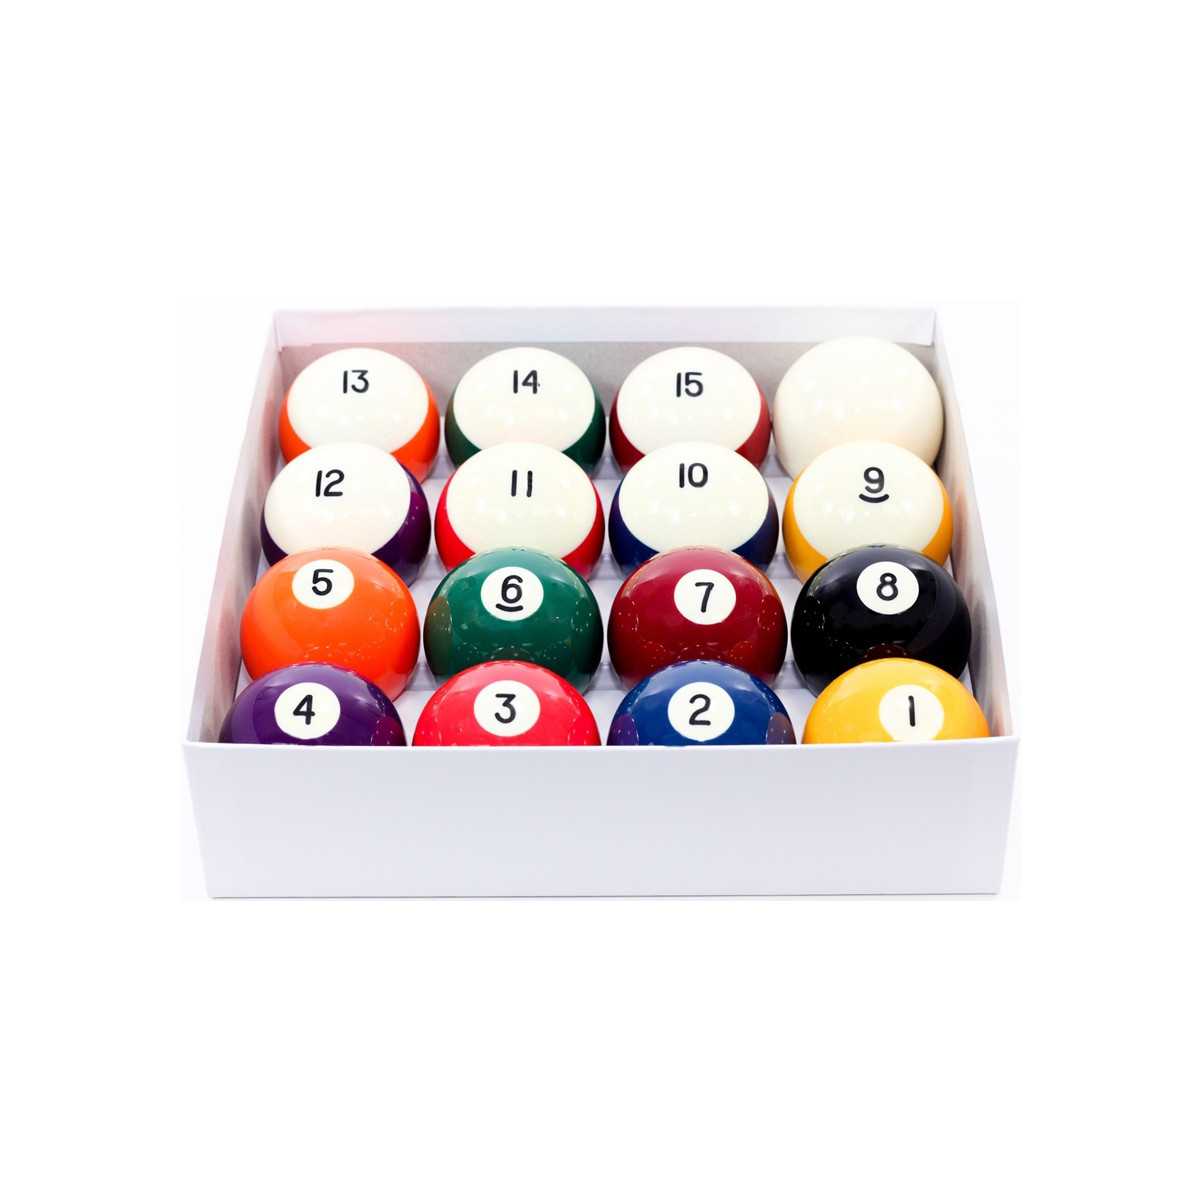 ARAMITH CROWN 2 1/4 IN BILLIARD BALL SET FOR COIN OPERATED TABLES